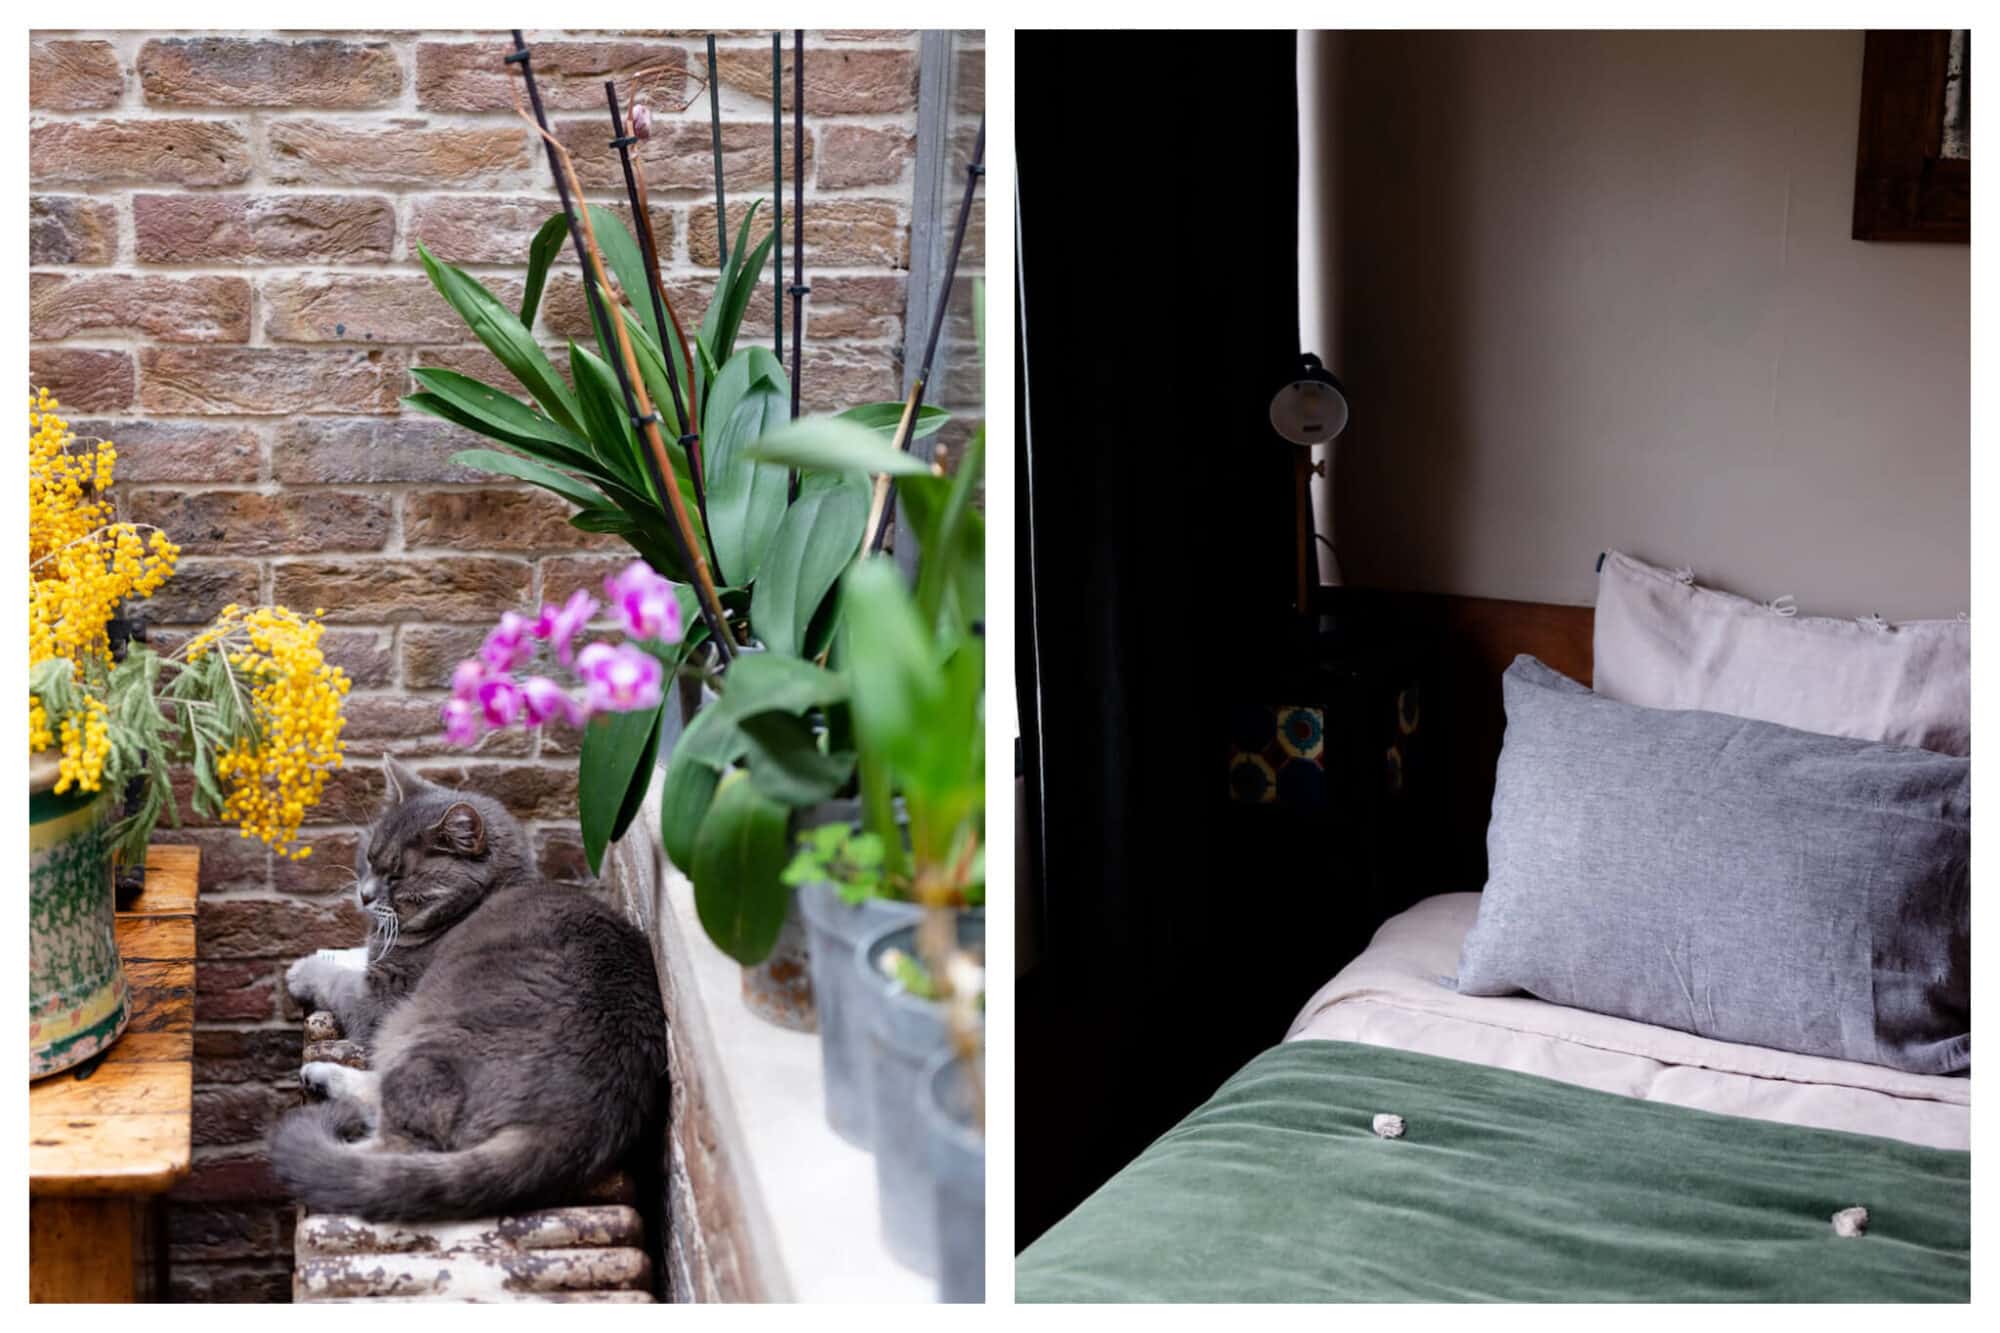 Left: A gray cat sits on a radiator surrounded by plants and flowers t Le 66 in Paris, Right: A close-up shot of a bed at Le 66 in Paris, decorated with pillows and  green blanket